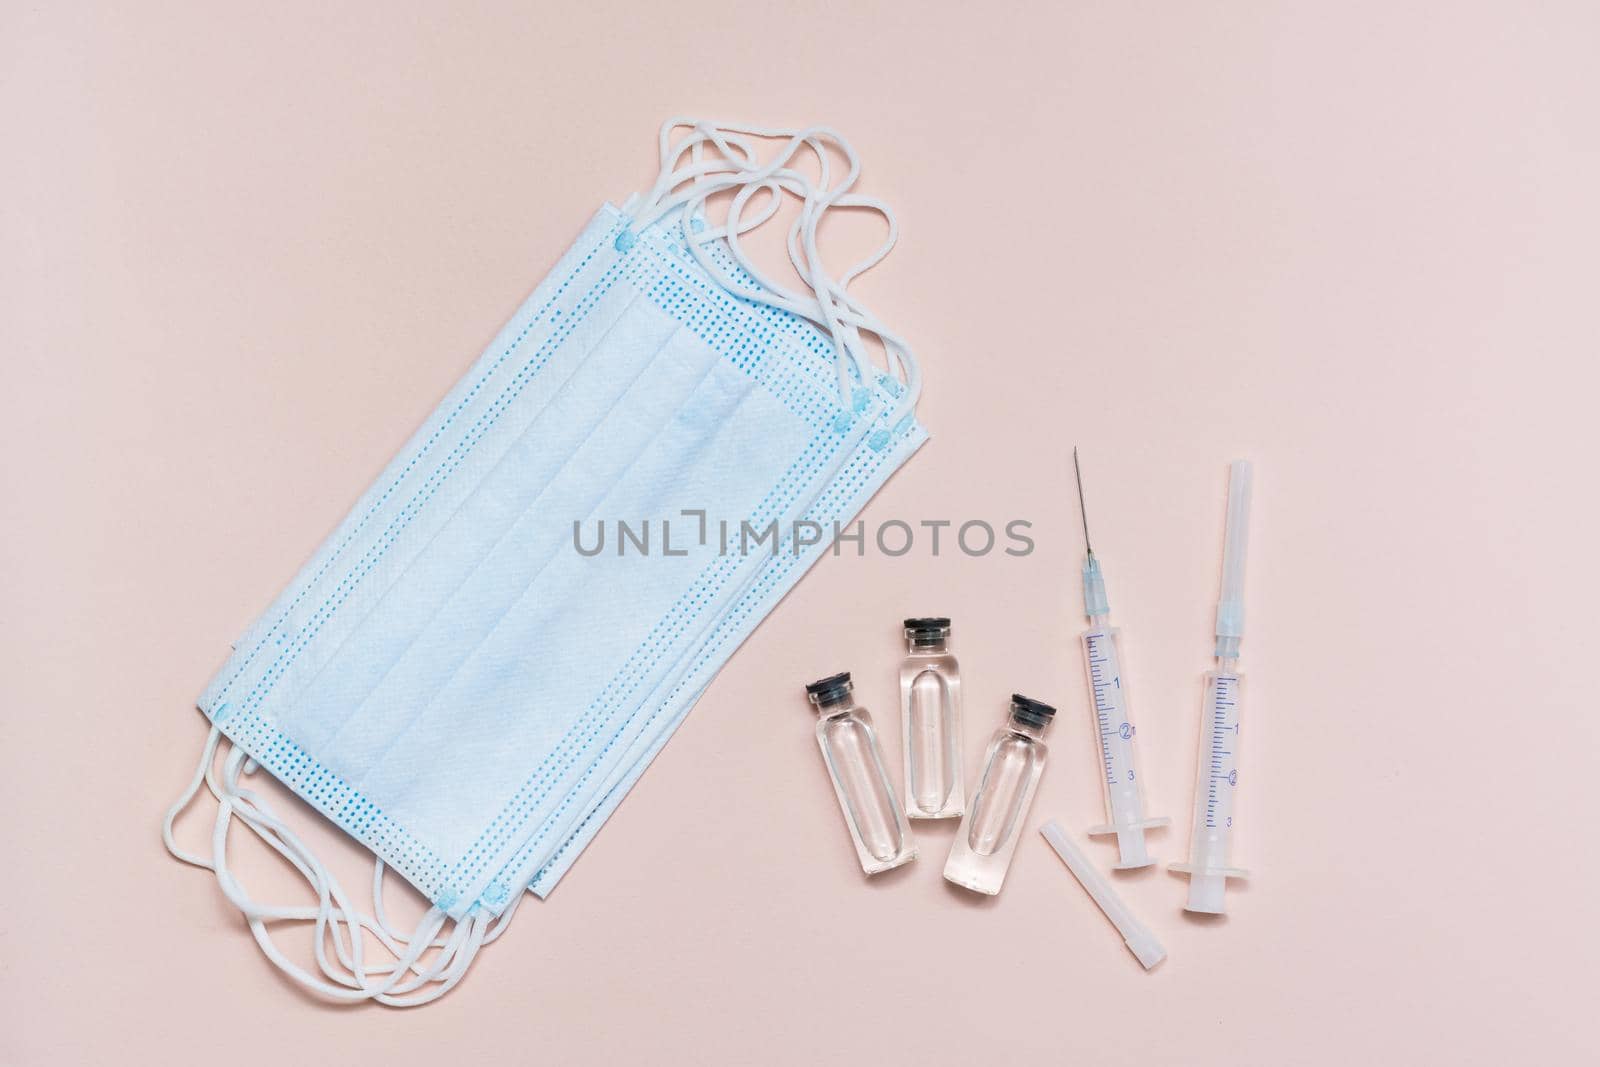 Vaccination and Immunization. Clean syringes, glass vial with vaccine and face protective masks. Top view. Close-up